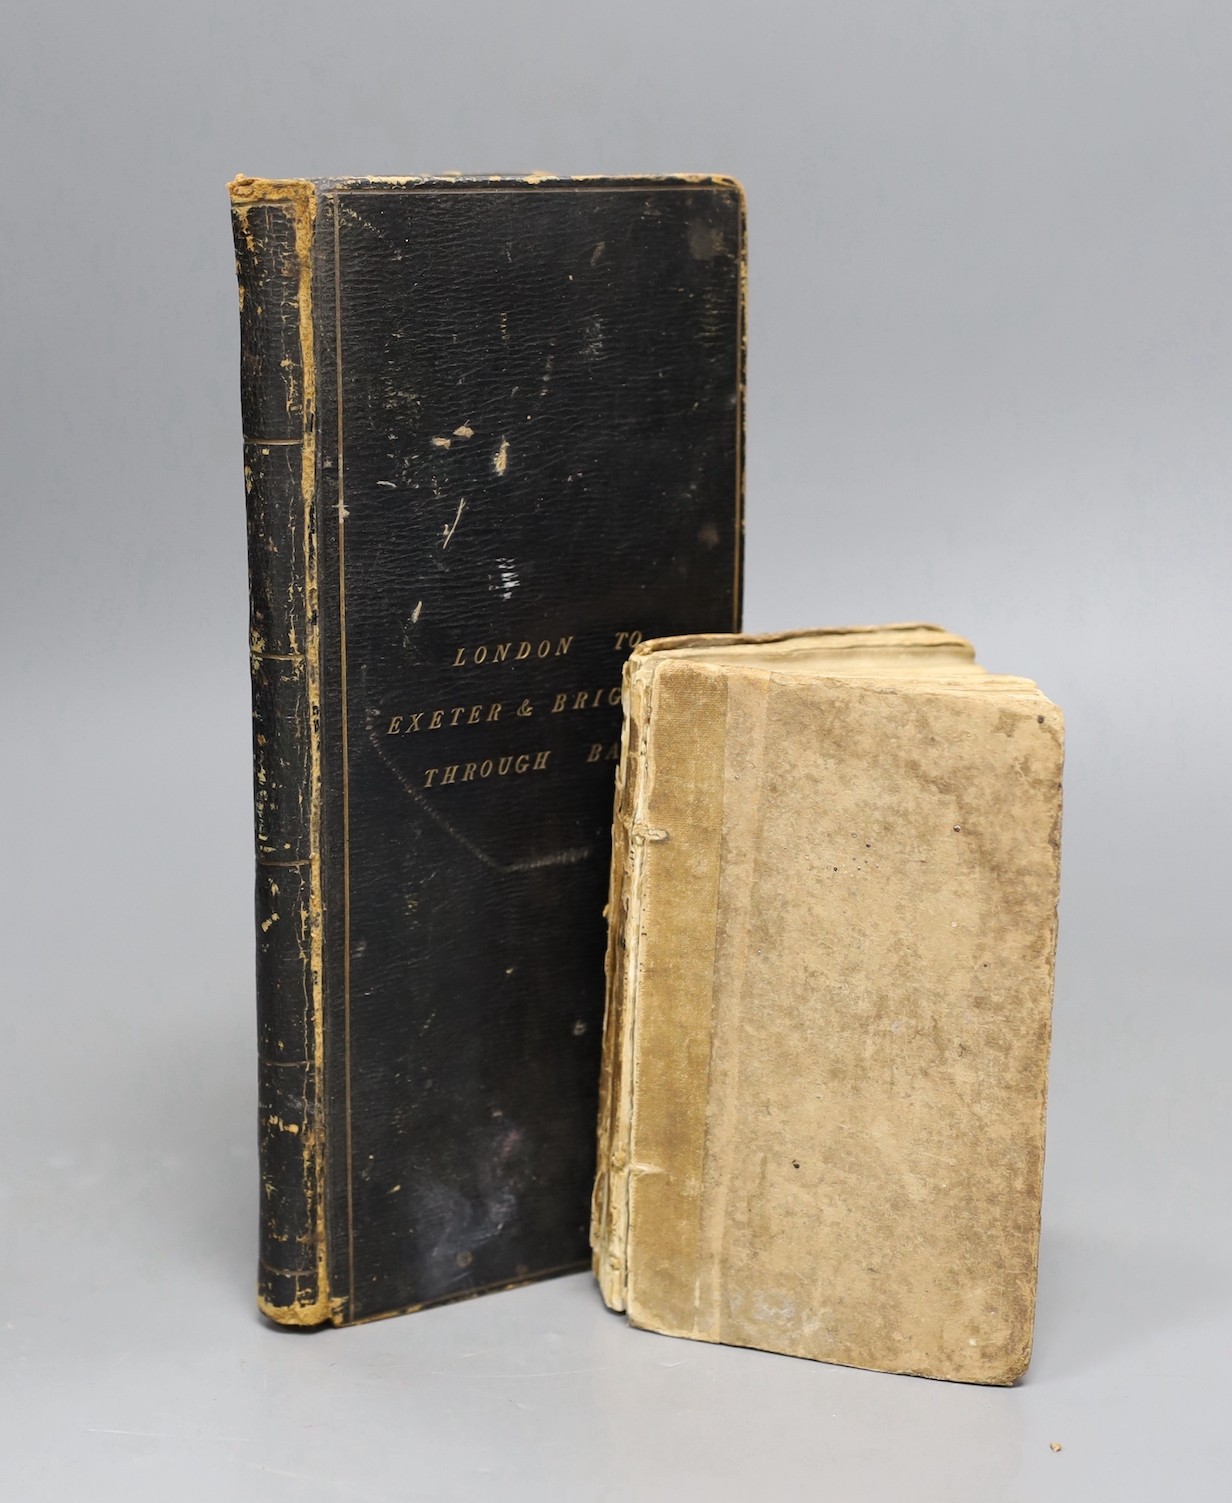 London to Exeter and Brighton through Bath, one volume and Questions on Herodotus, 1827, one volume                                                                                                                         